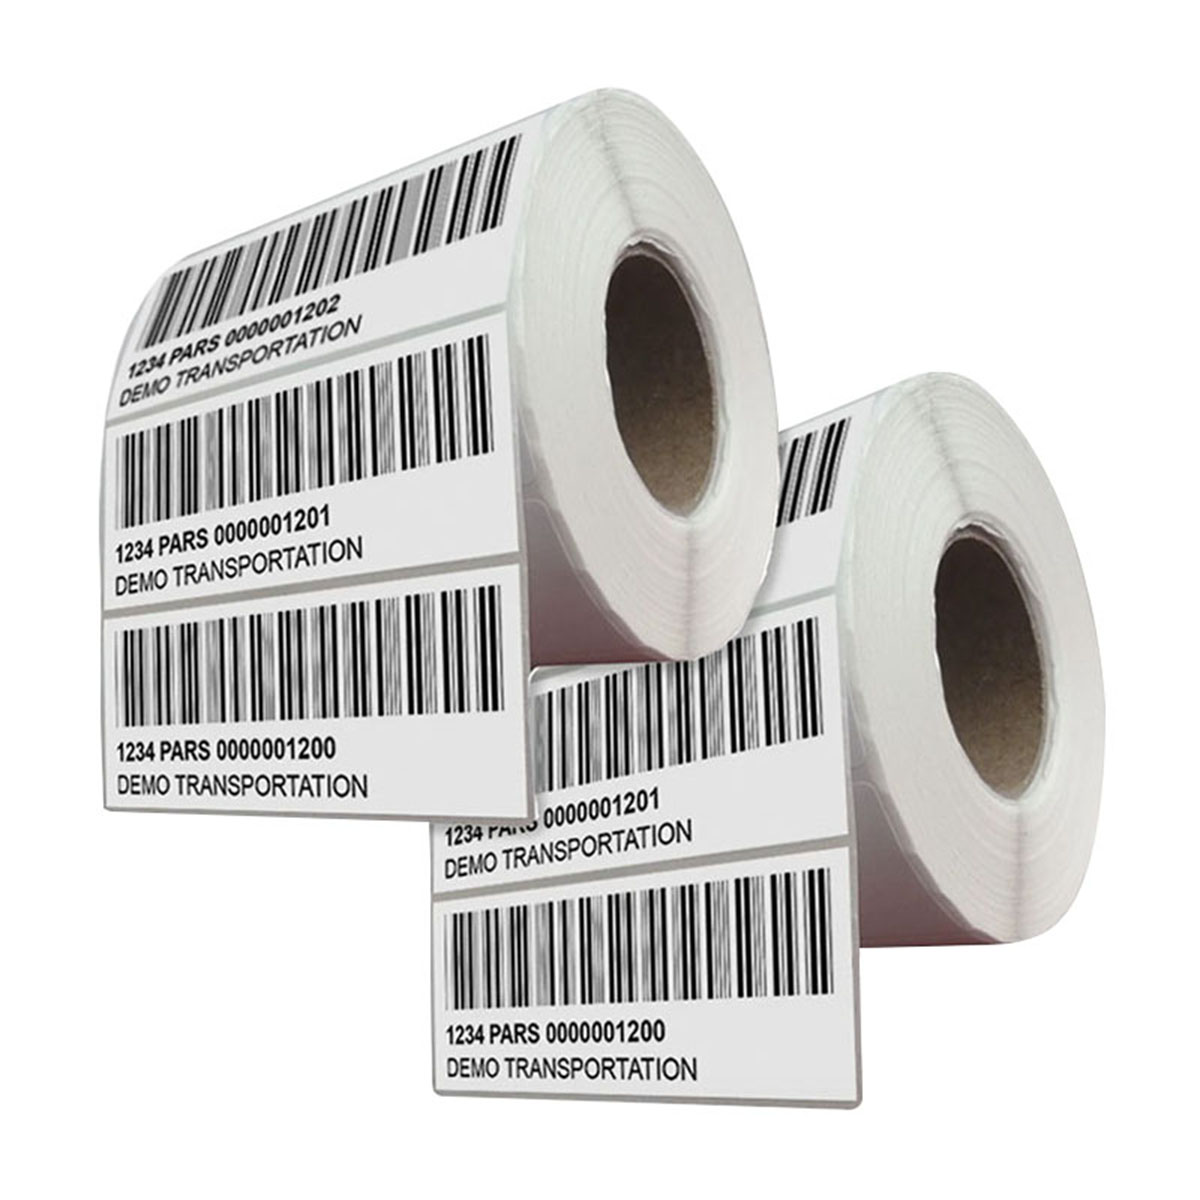 Product Barcode Label